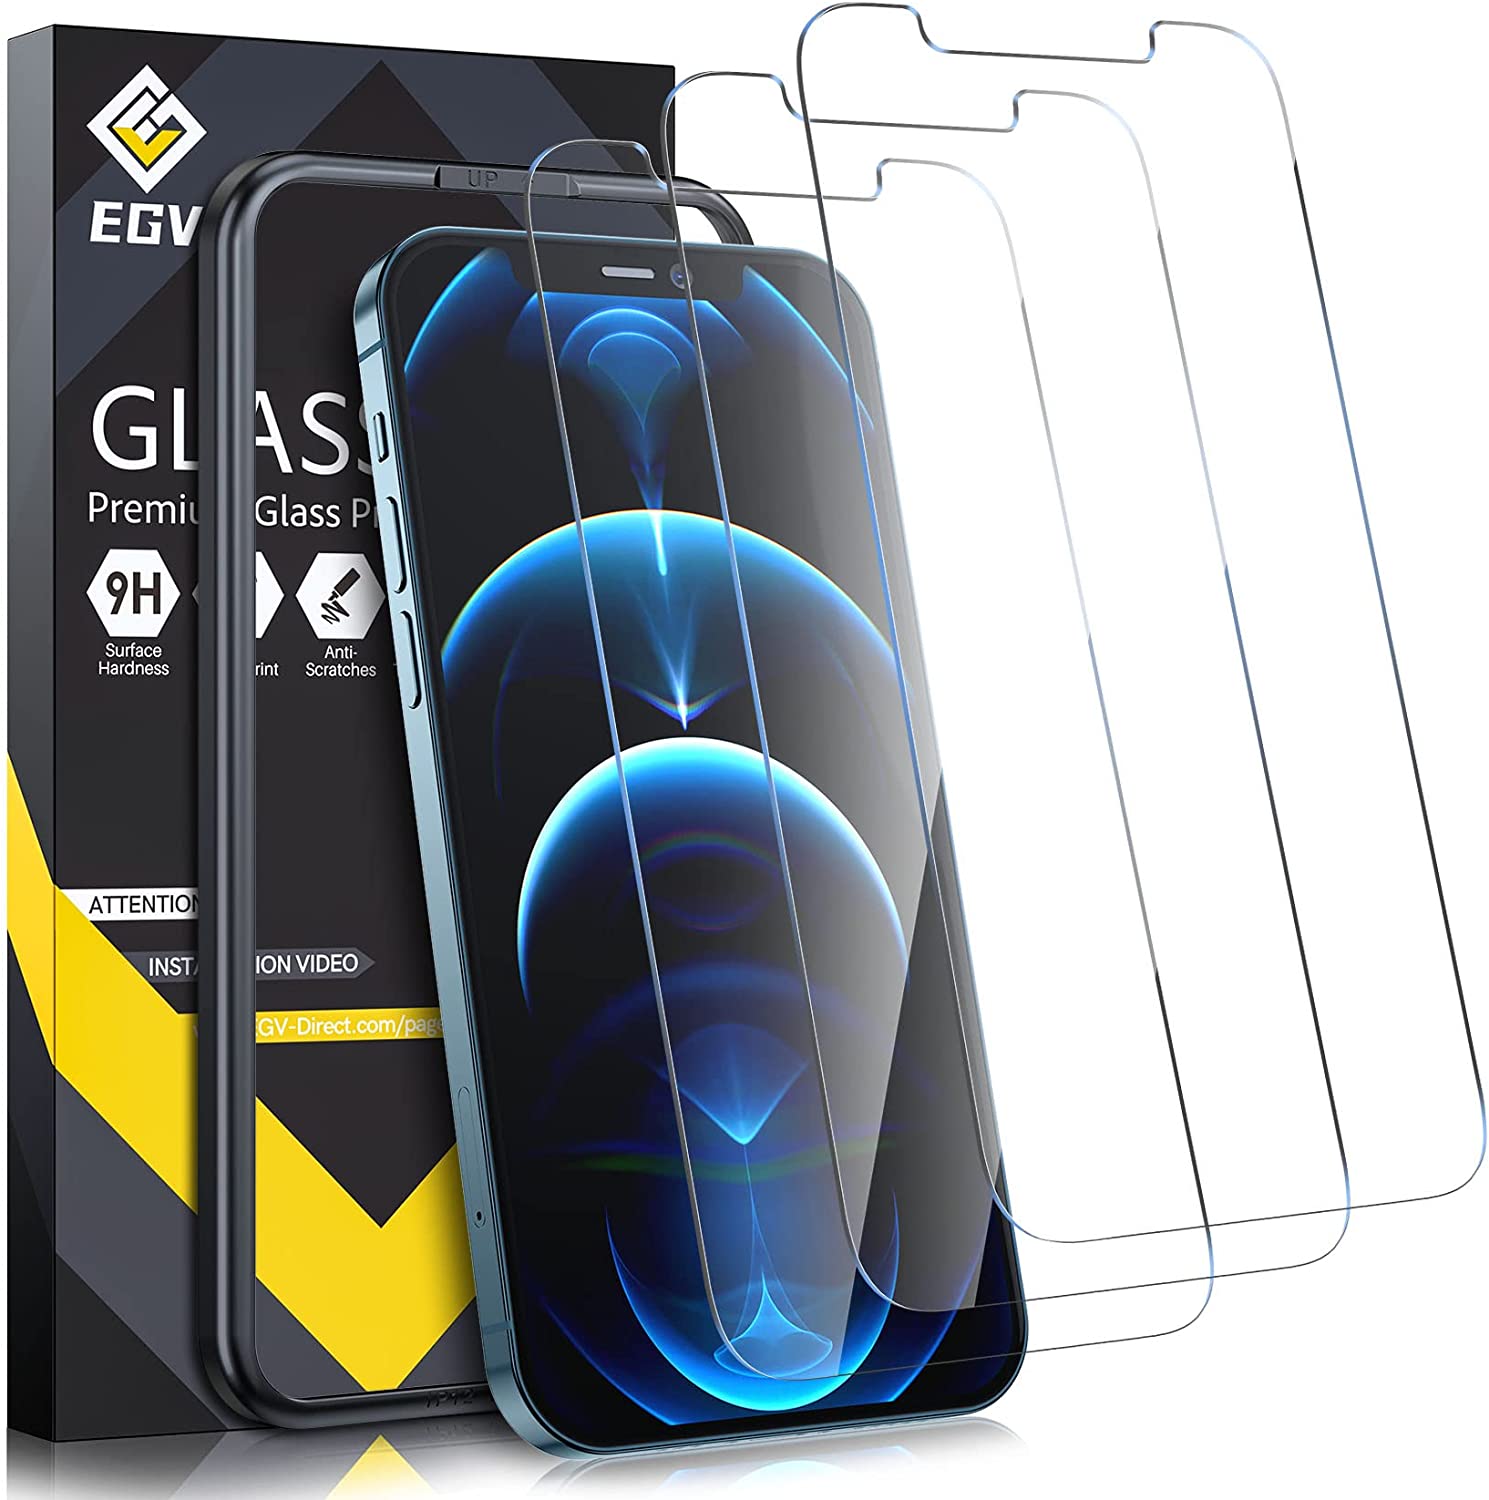 EGV 3+3 Tempered Glass Screen Protector Iphone 12 RRP 6.99 CLEARANCE XL 4.99